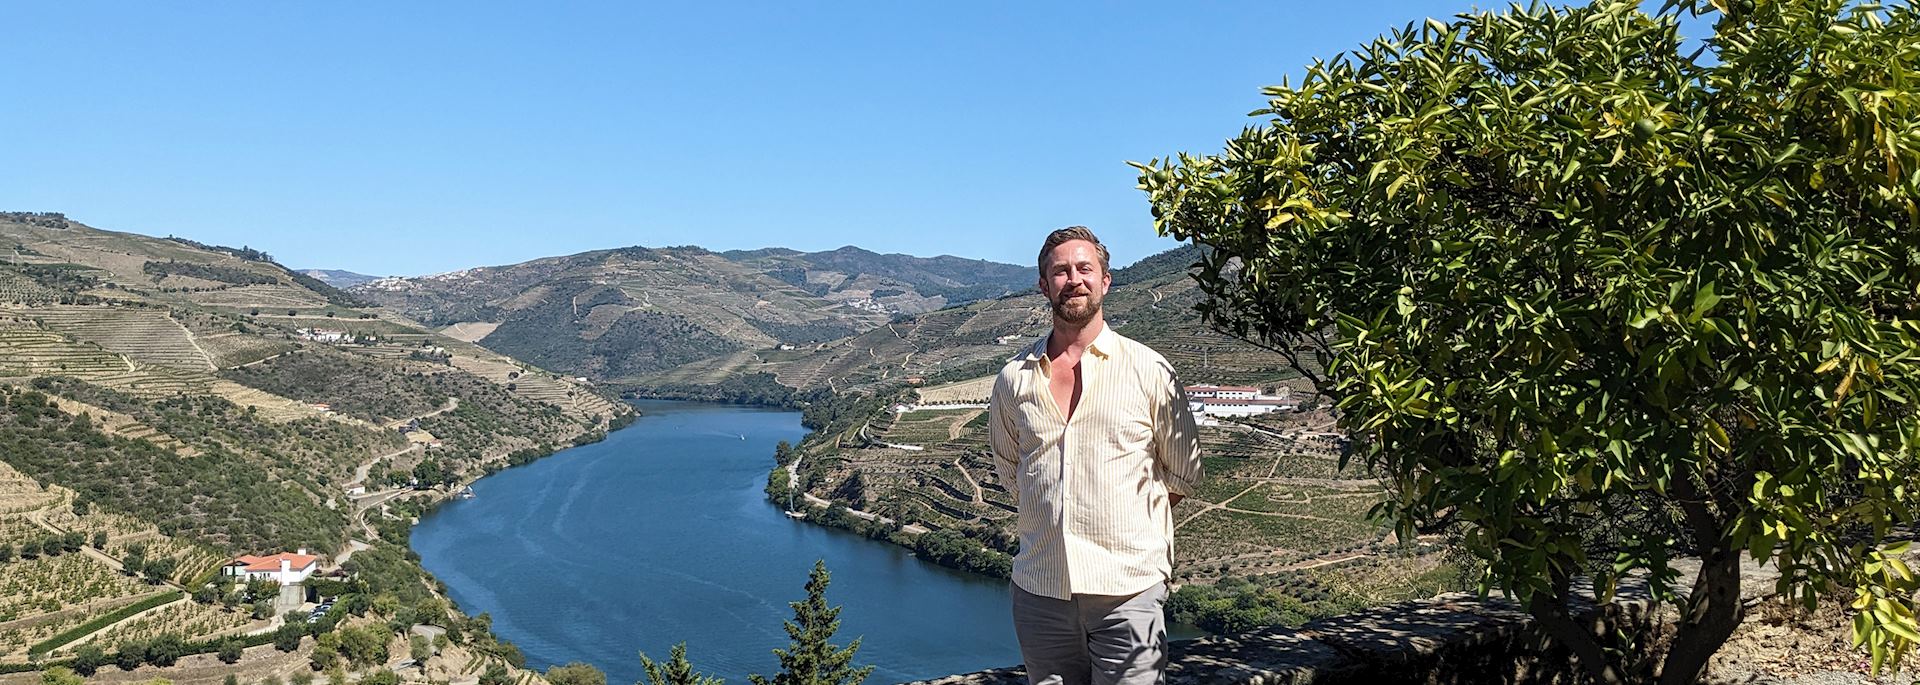 Eric at the Douro Valley, Portugal